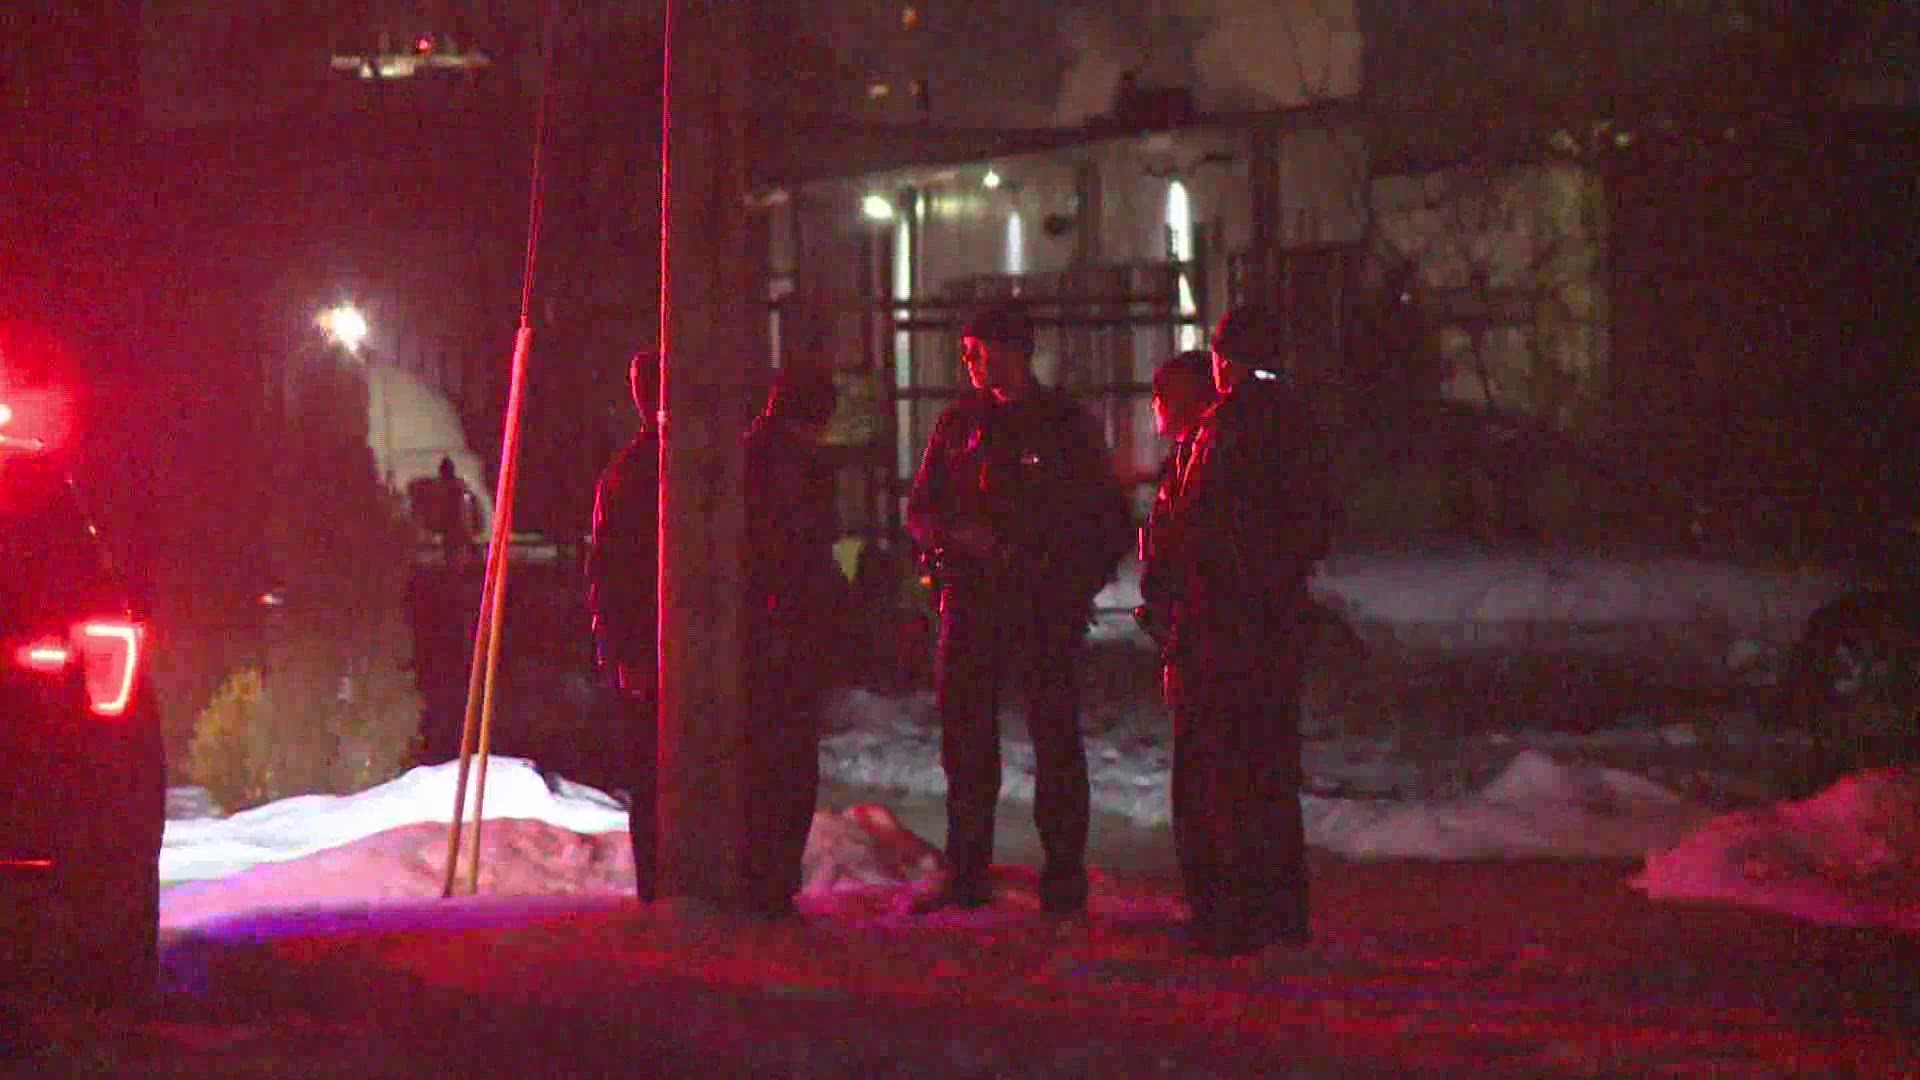 Police investigating what may have been a shooting in Grand Rapids overnight.